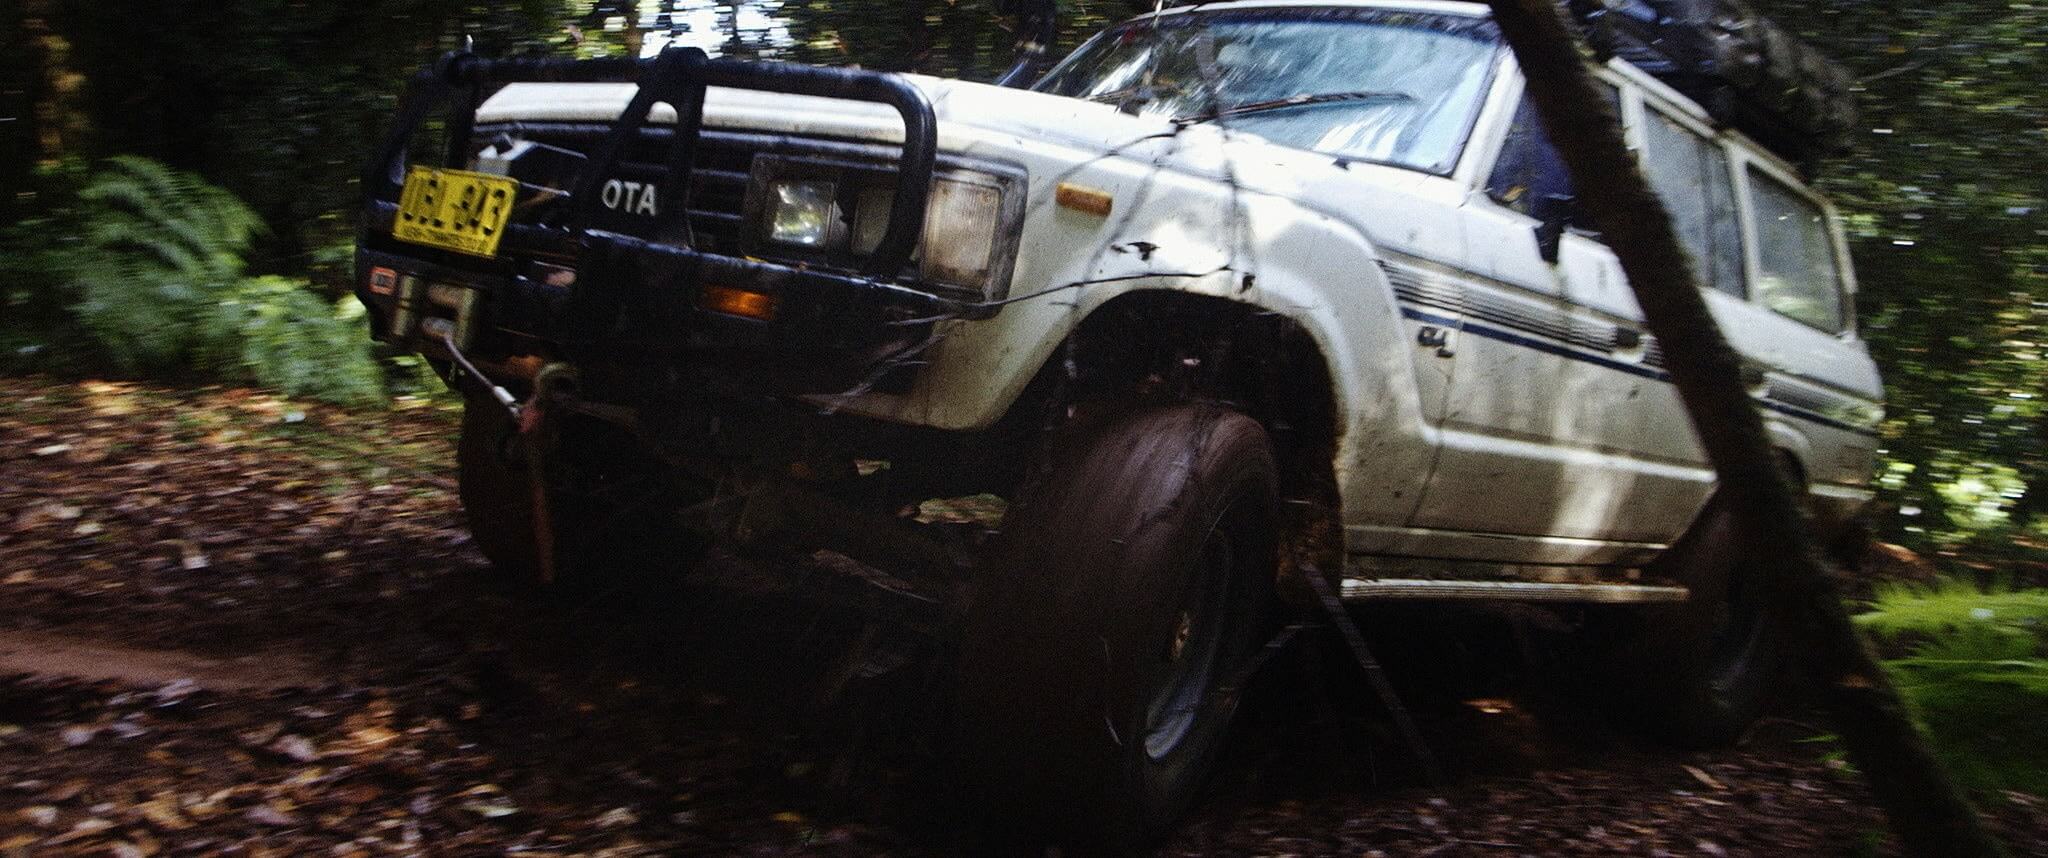 Abe’s trusty old 60 series Landcruiser makes mince of a muddy hill climb!